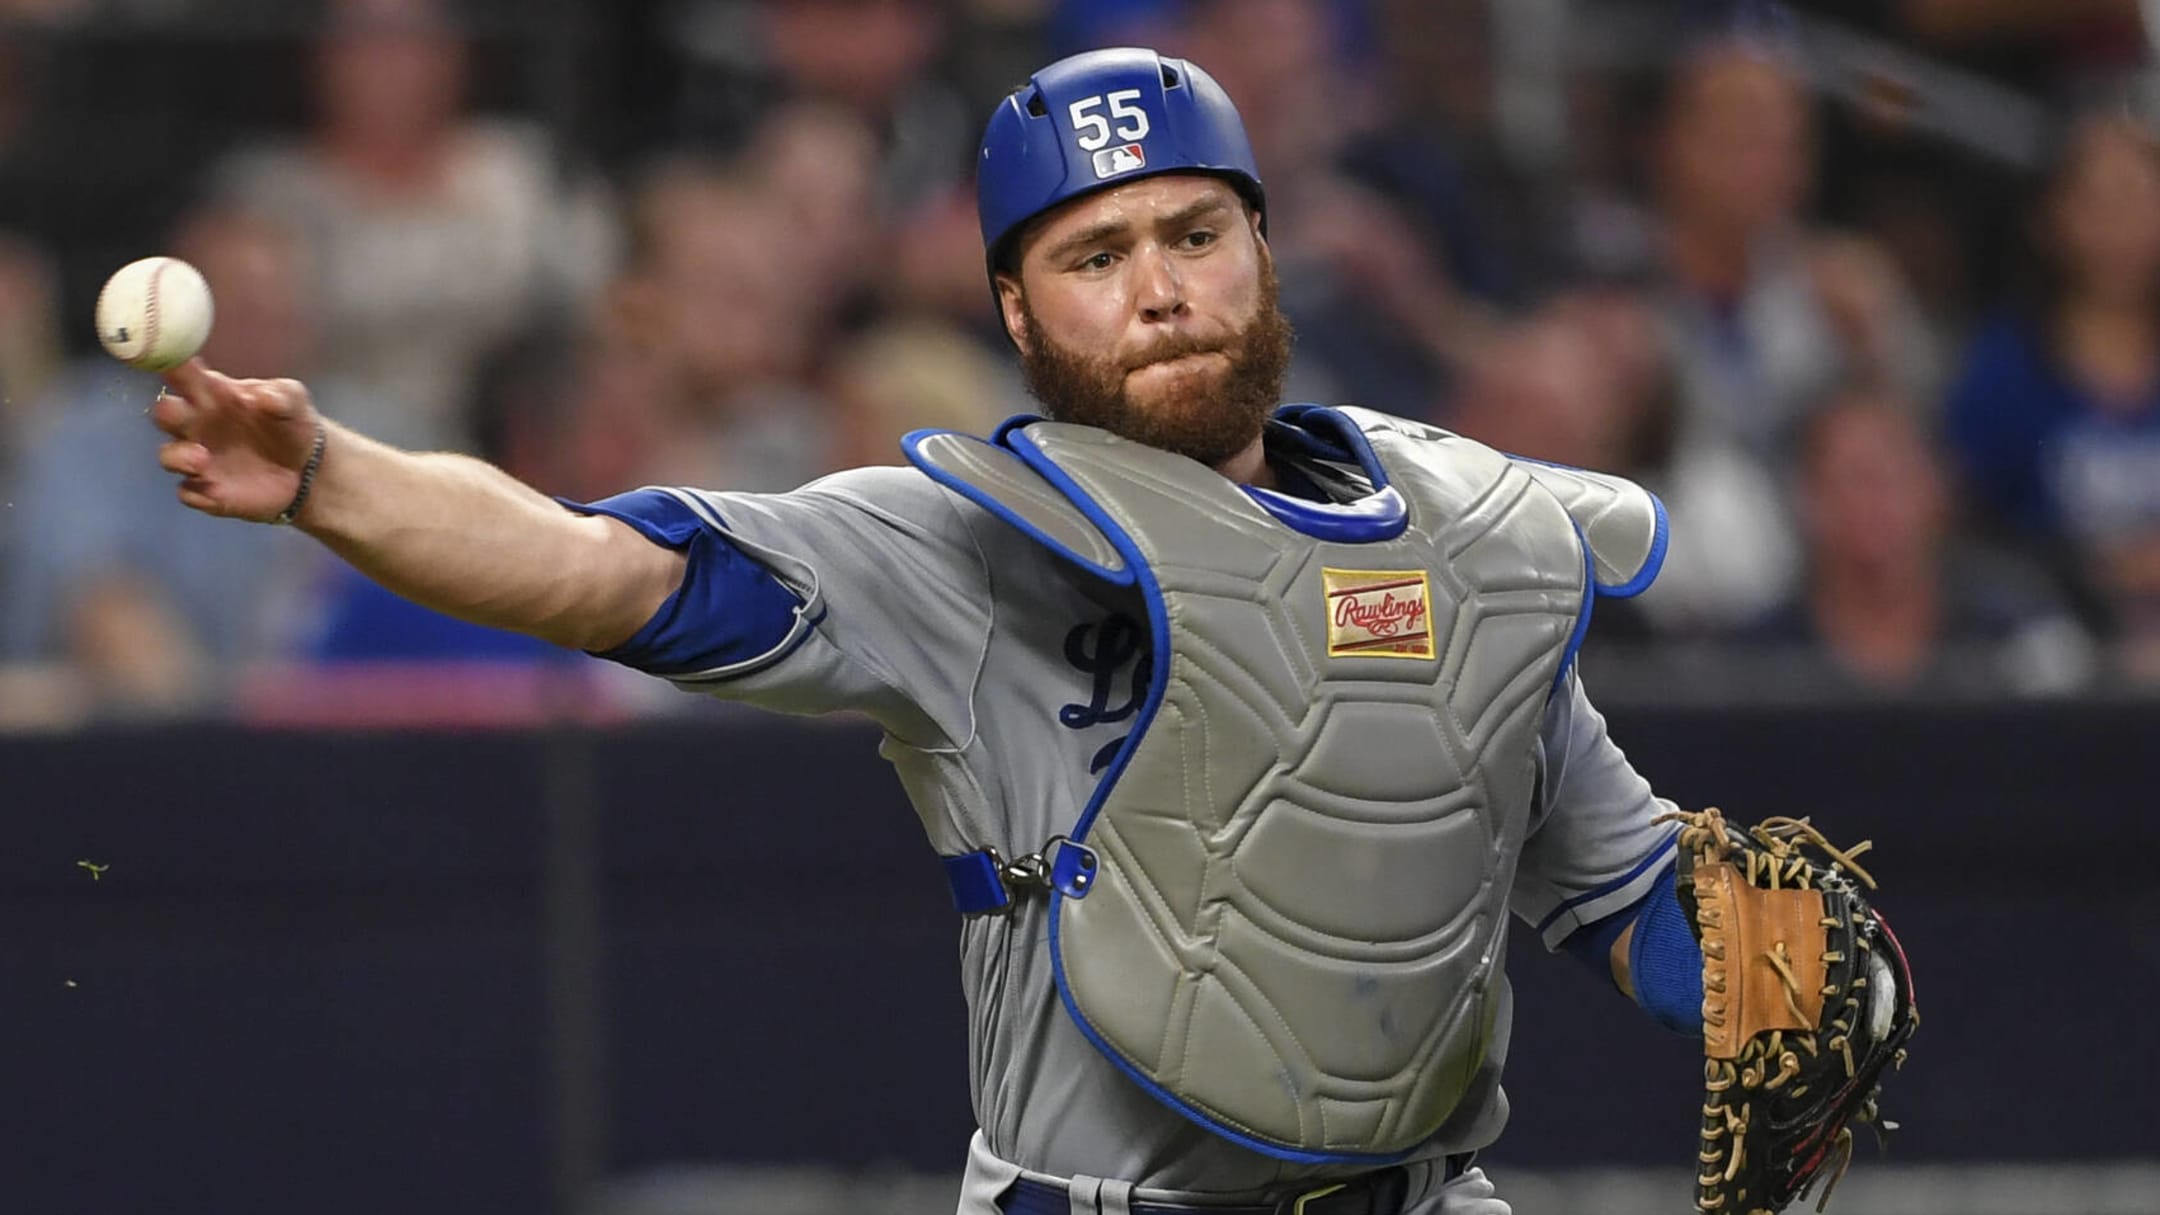 Four-time All-Star catcher Russell Martin retires